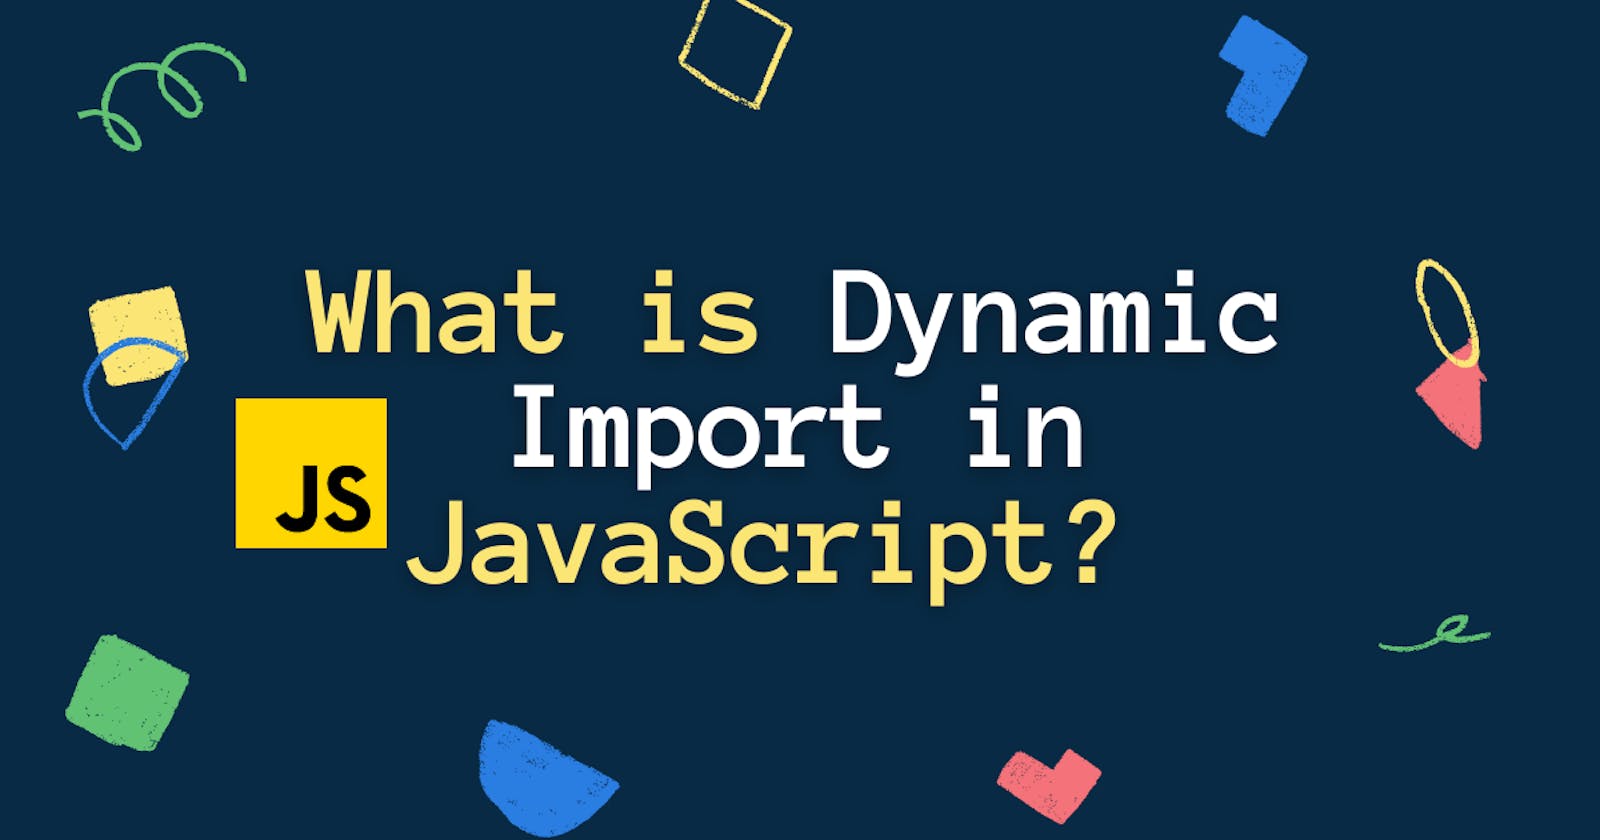 What is Dynamic Import in JavaScript?